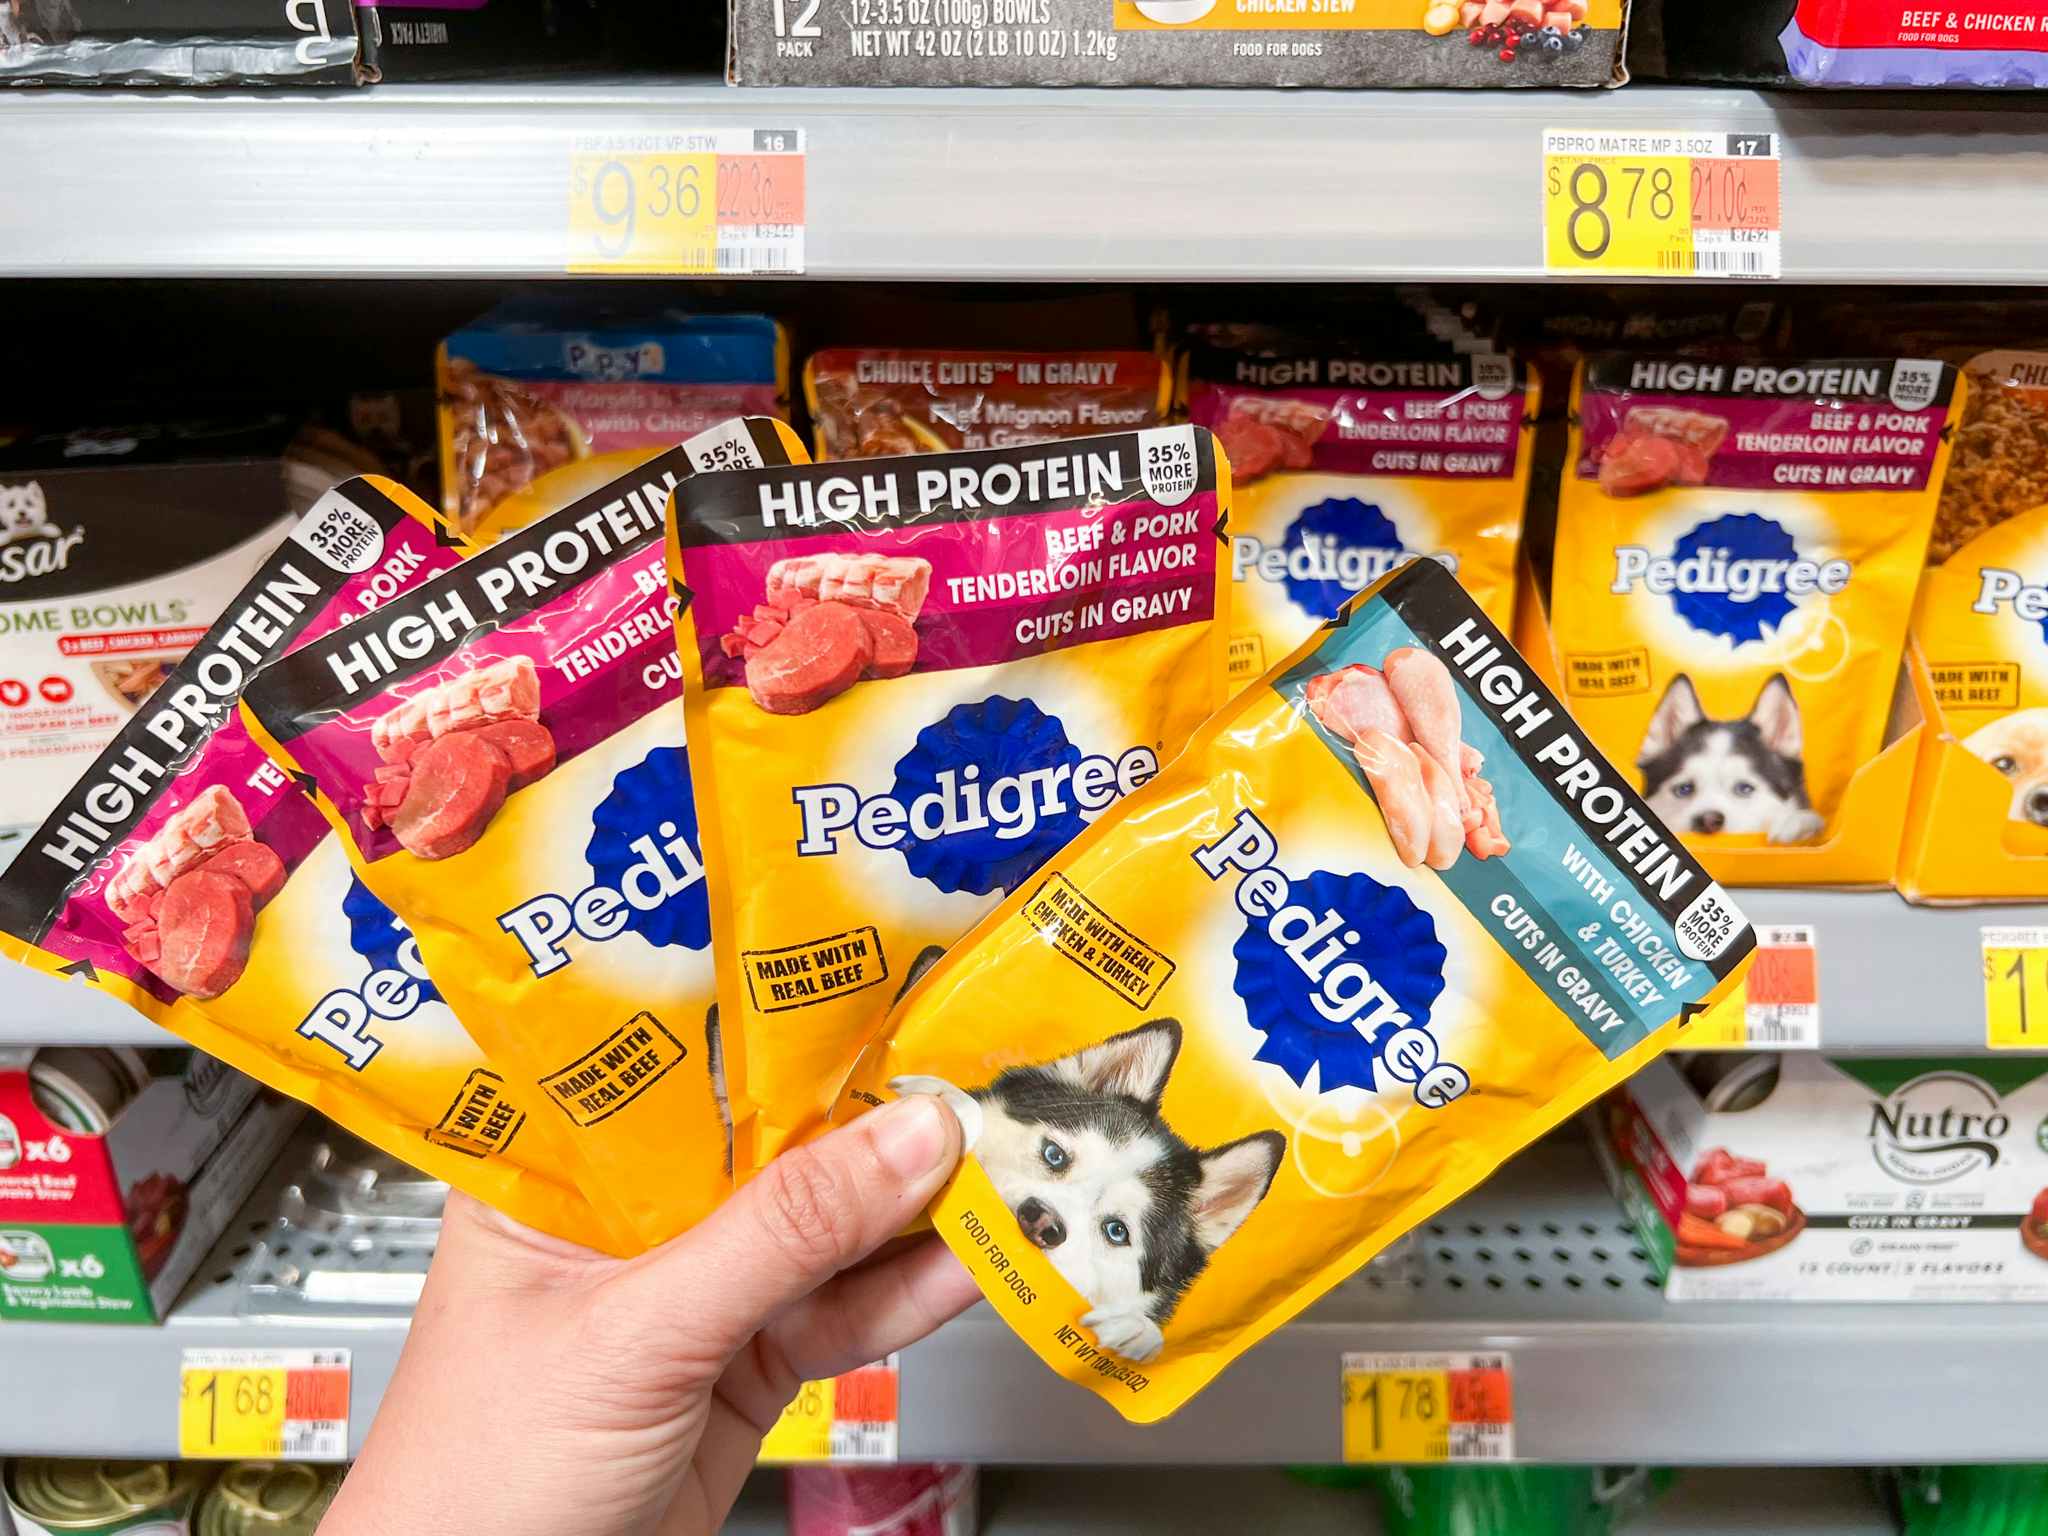 A hand holding four packs of pedigree high protein dog food in front of a walmart shelf